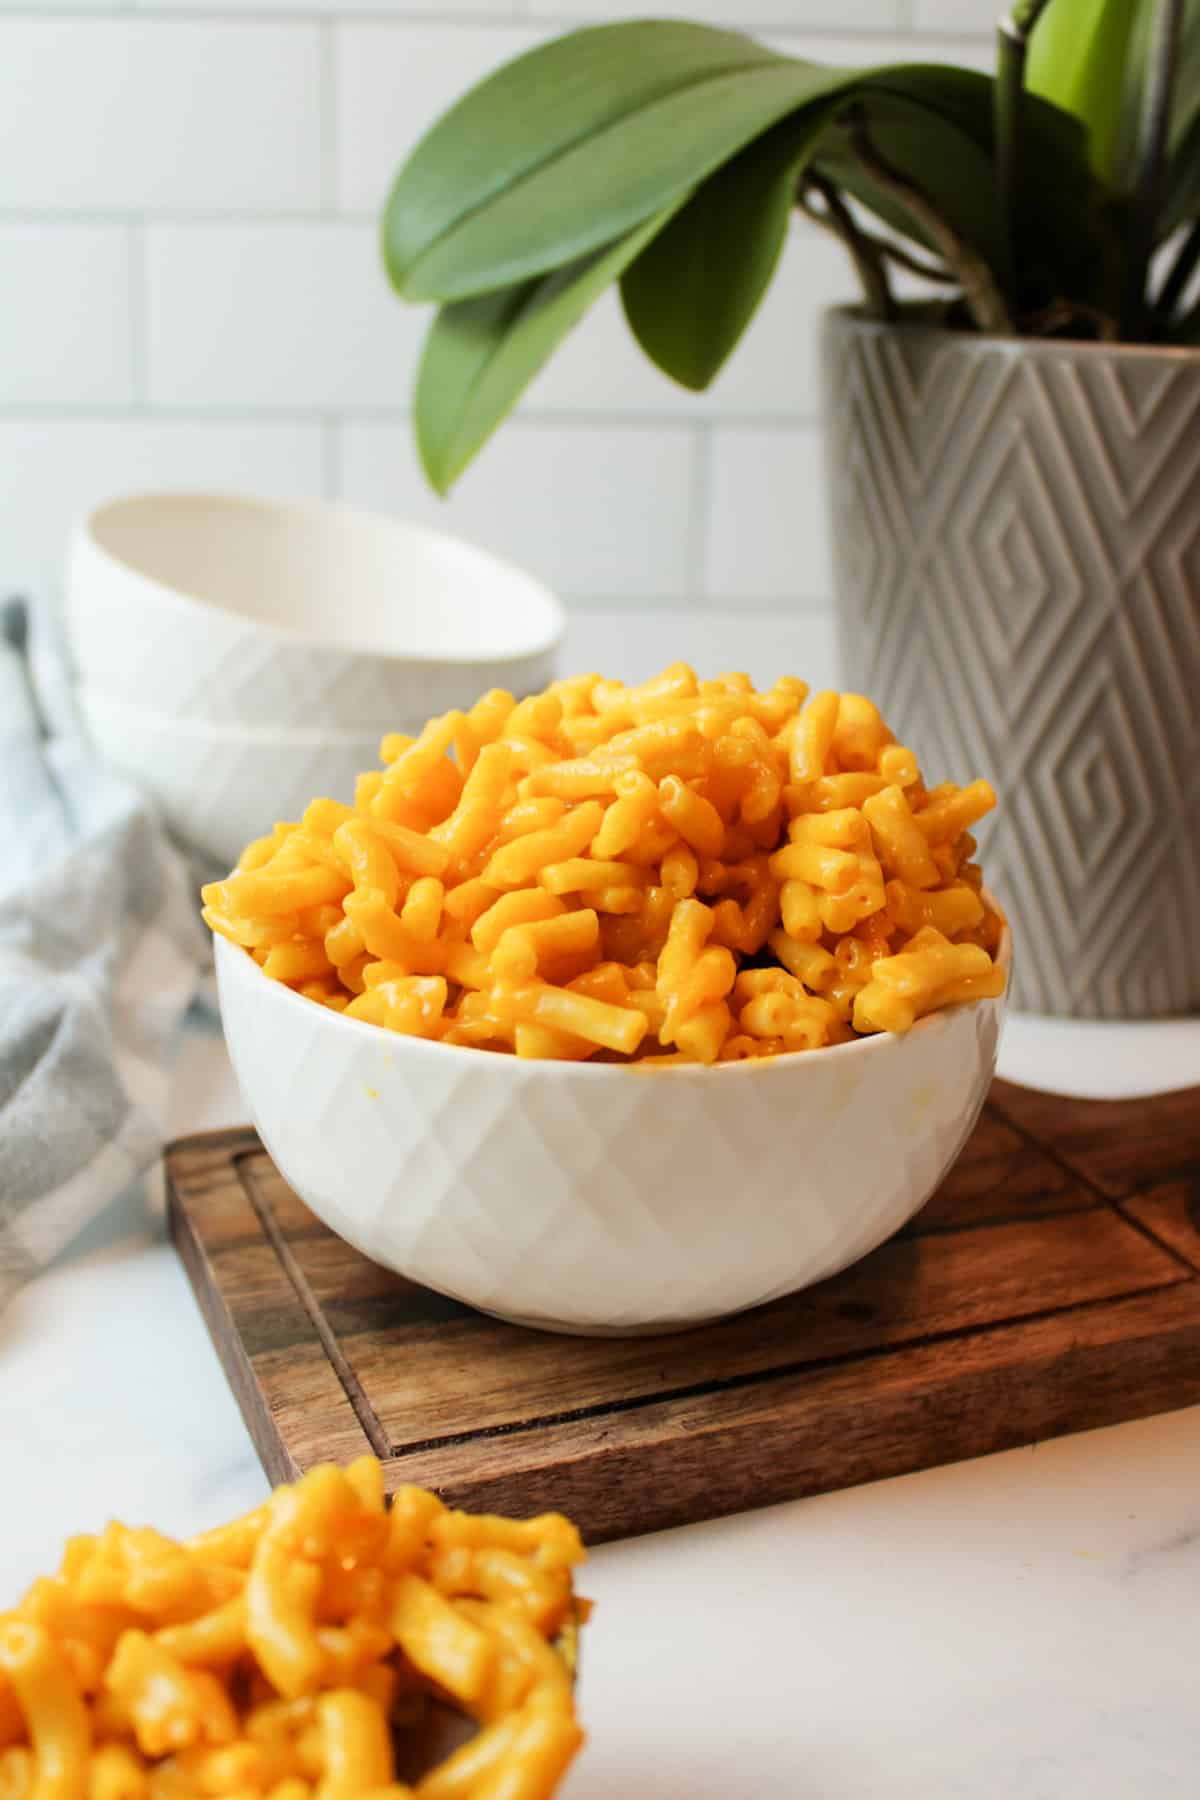 a heaping bowl of mac and cheese in front of a plant and empty bowls.